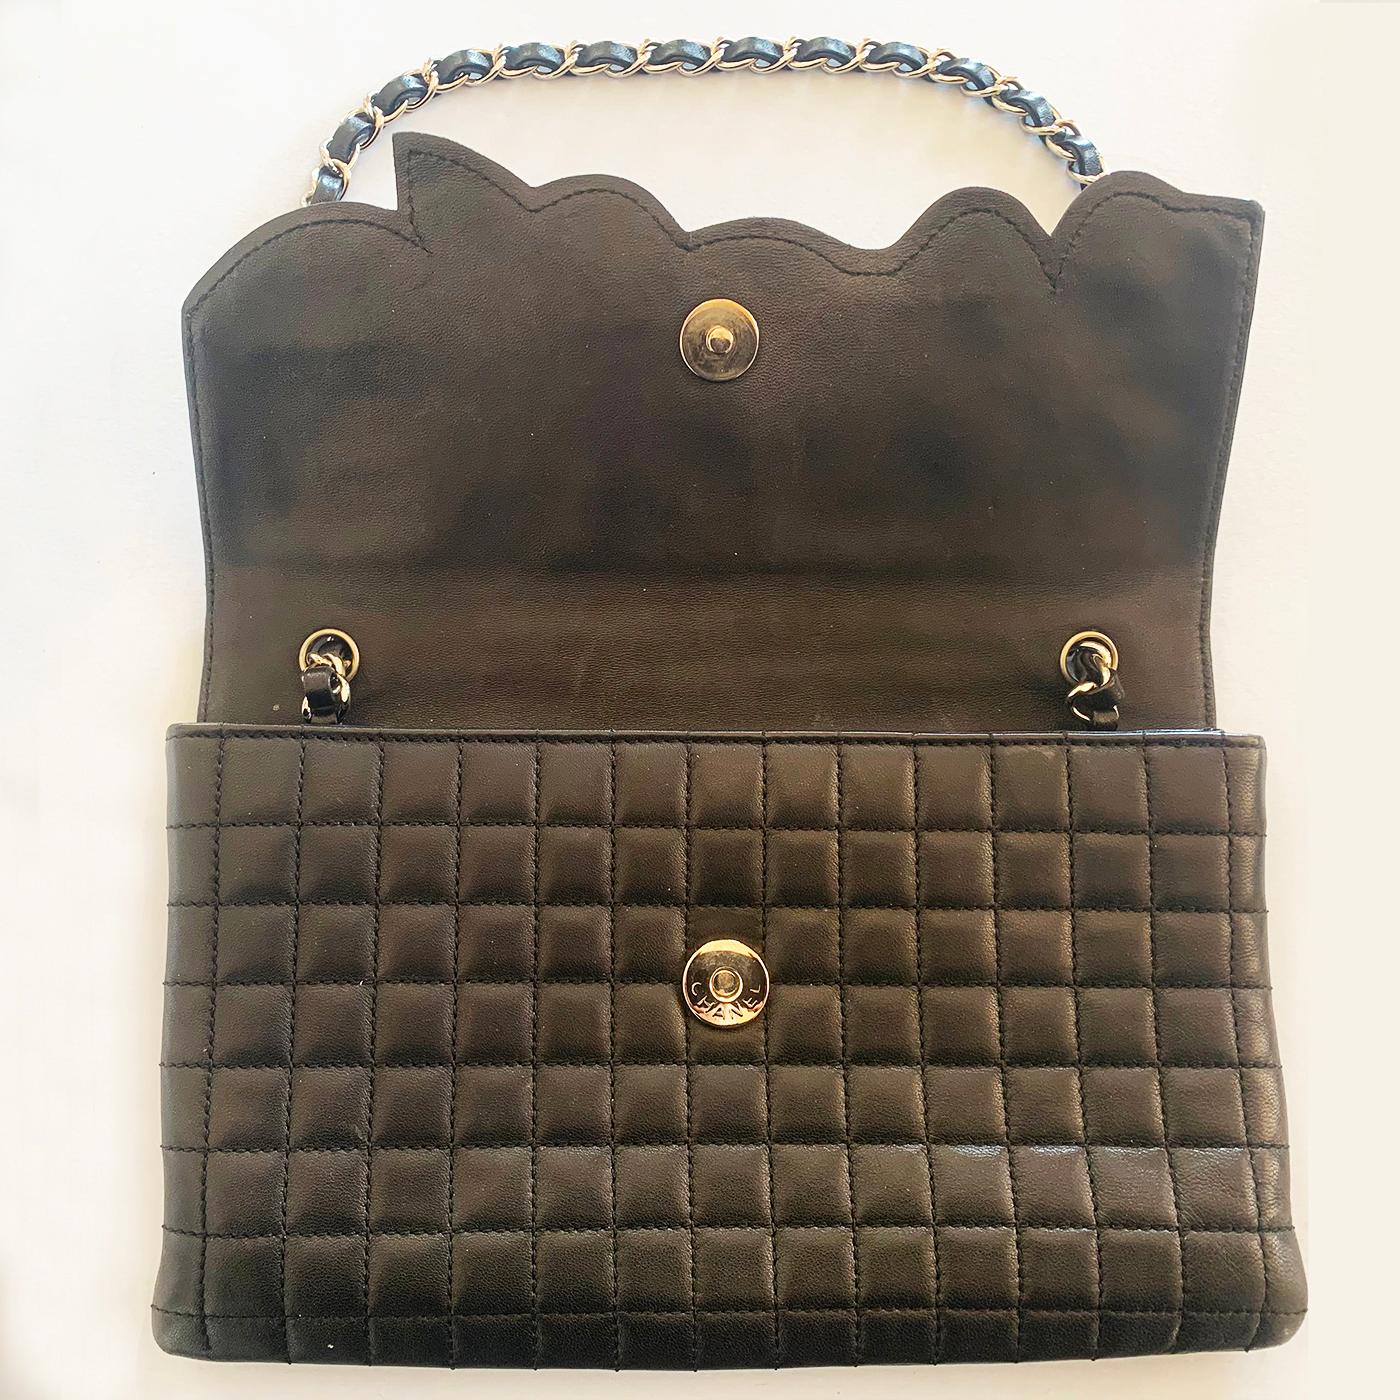 Authentic Chanel Black Camelia Clutch or Handbag, double interior, Zipped pocket to one, and in original Box. The Shoulder leather plaited shoulder chain can be folded to the inside, for it to be used as a Clutch if desired. The Authentication